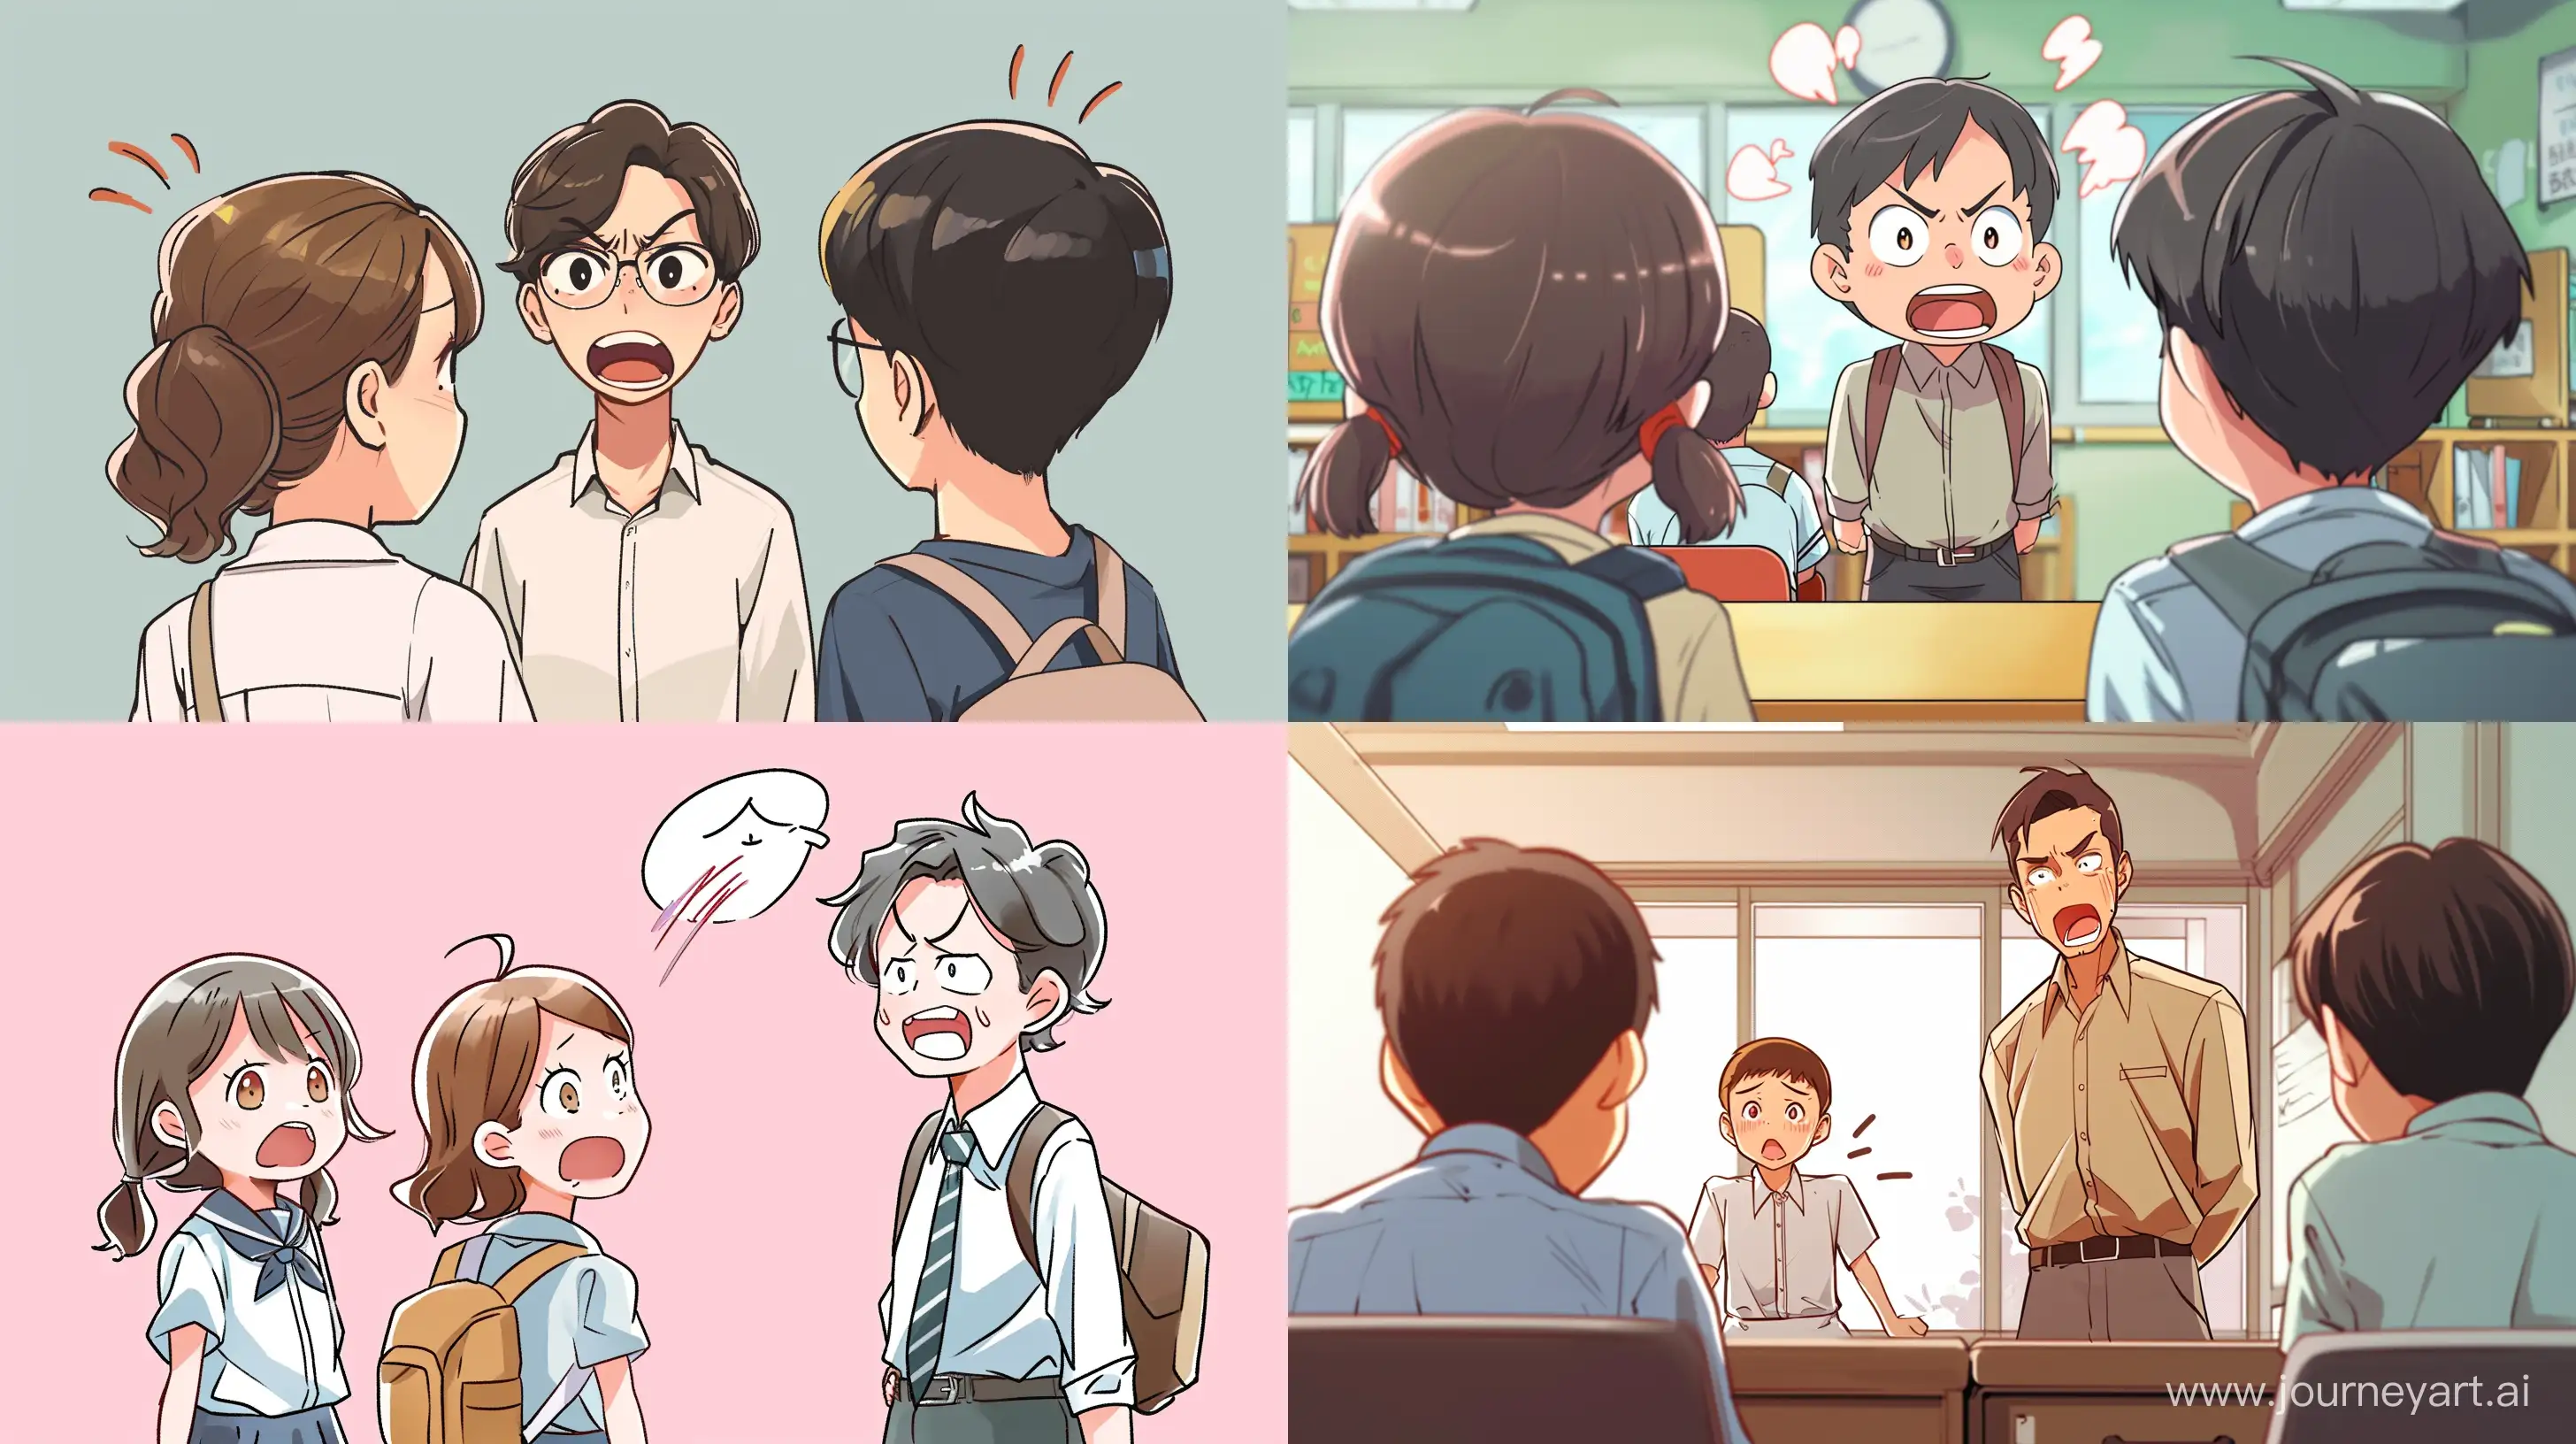 Chibi-Anime-Teacher-Supervising-Distant-Students-with-Shouting